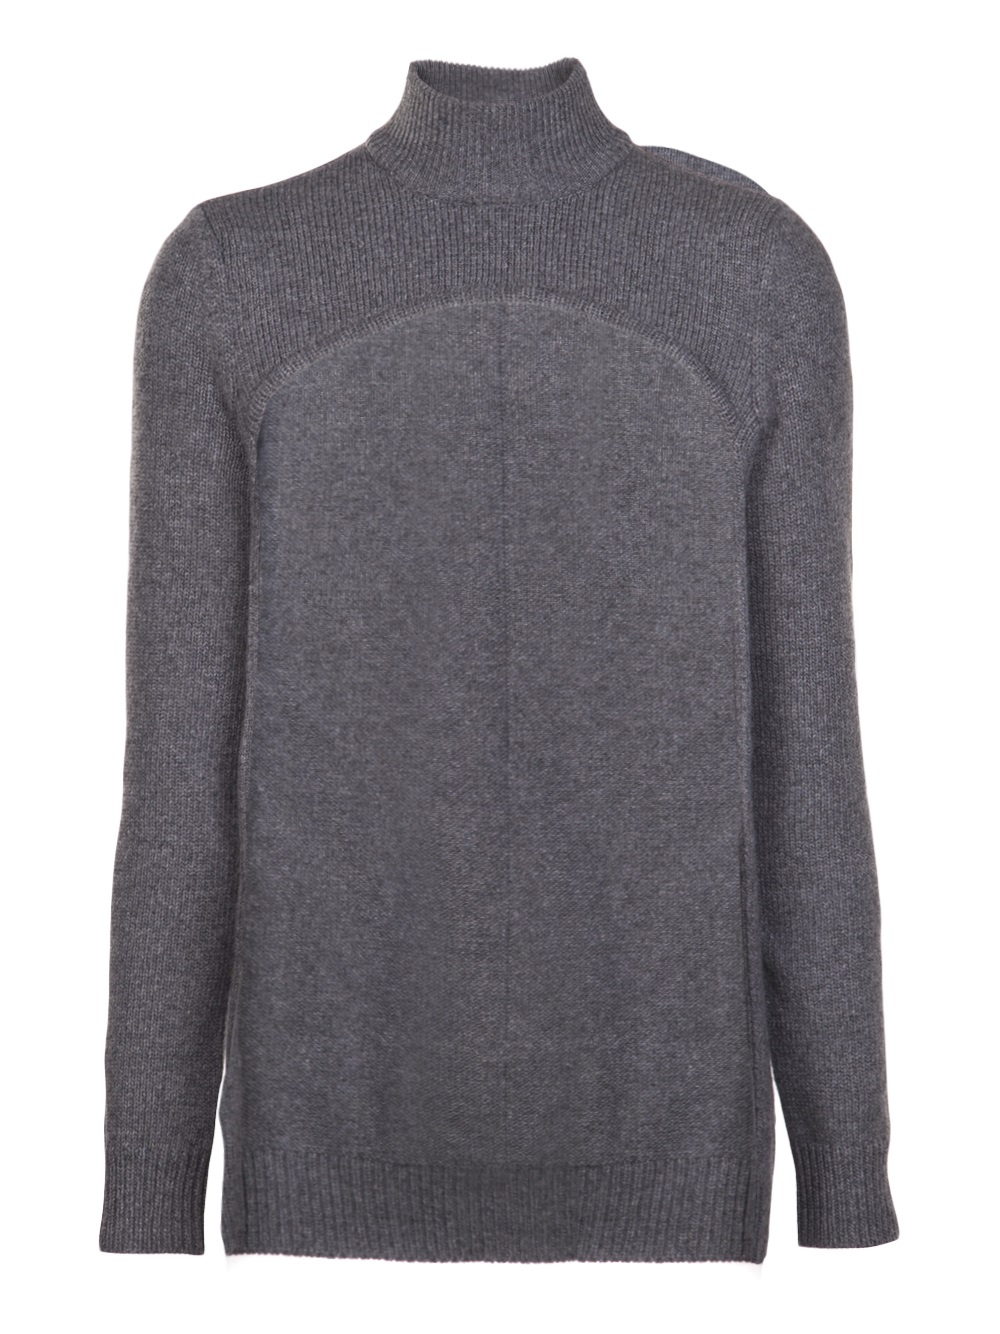 Givenchy Turtleneck Sweater in Grey (Gray) - Lyst